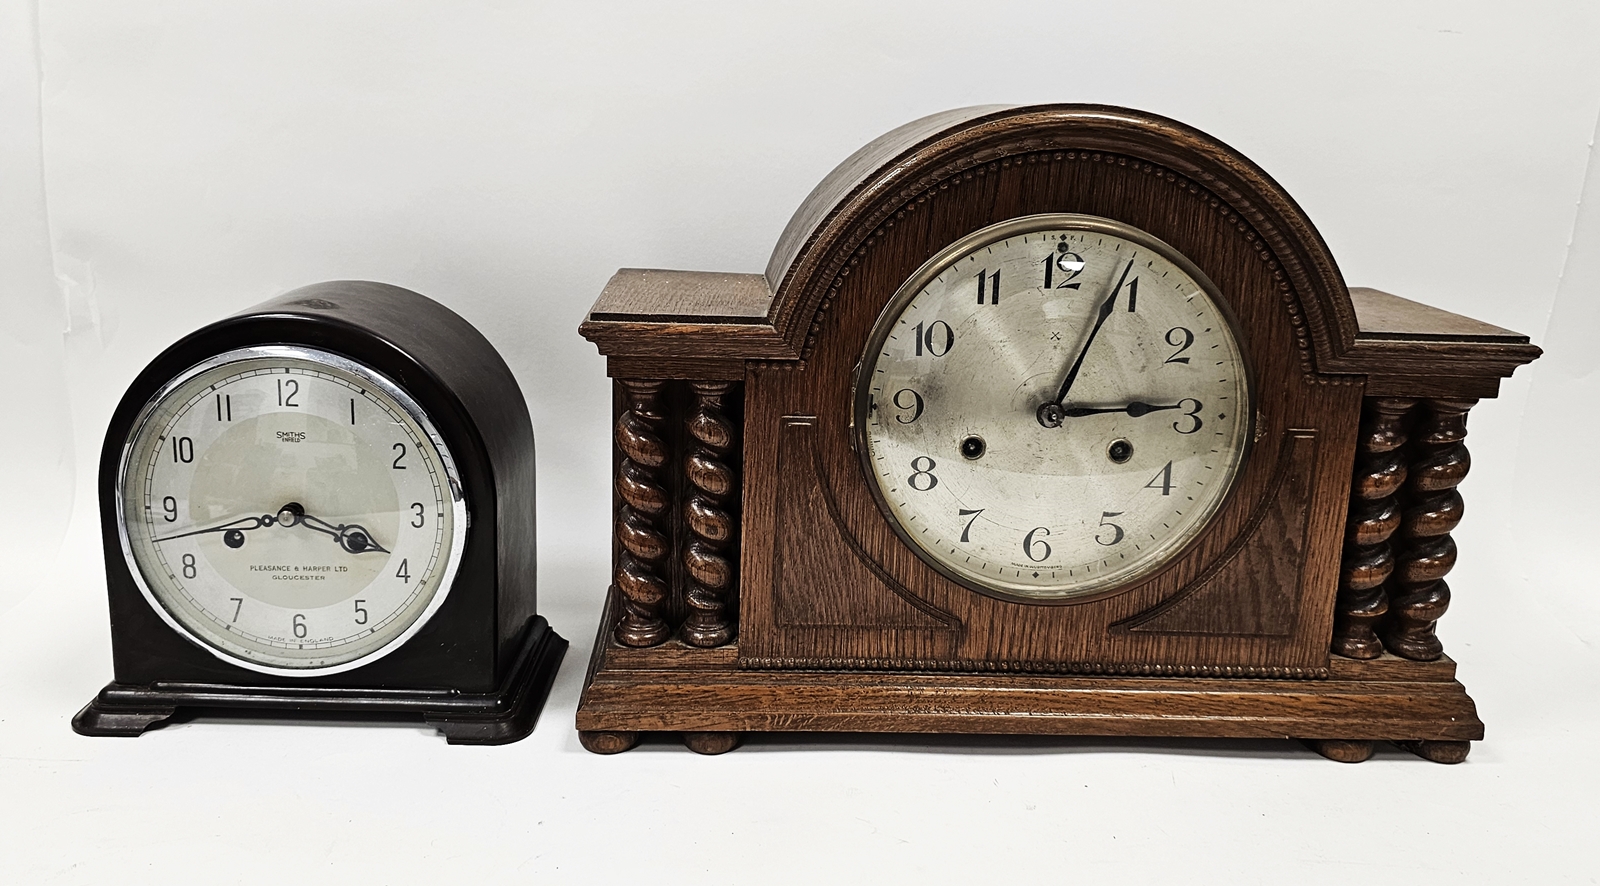 Arched shaped bakelite mantel clock by Smiths, Enfield retailed by Pleasance & Harper, Gloucester,